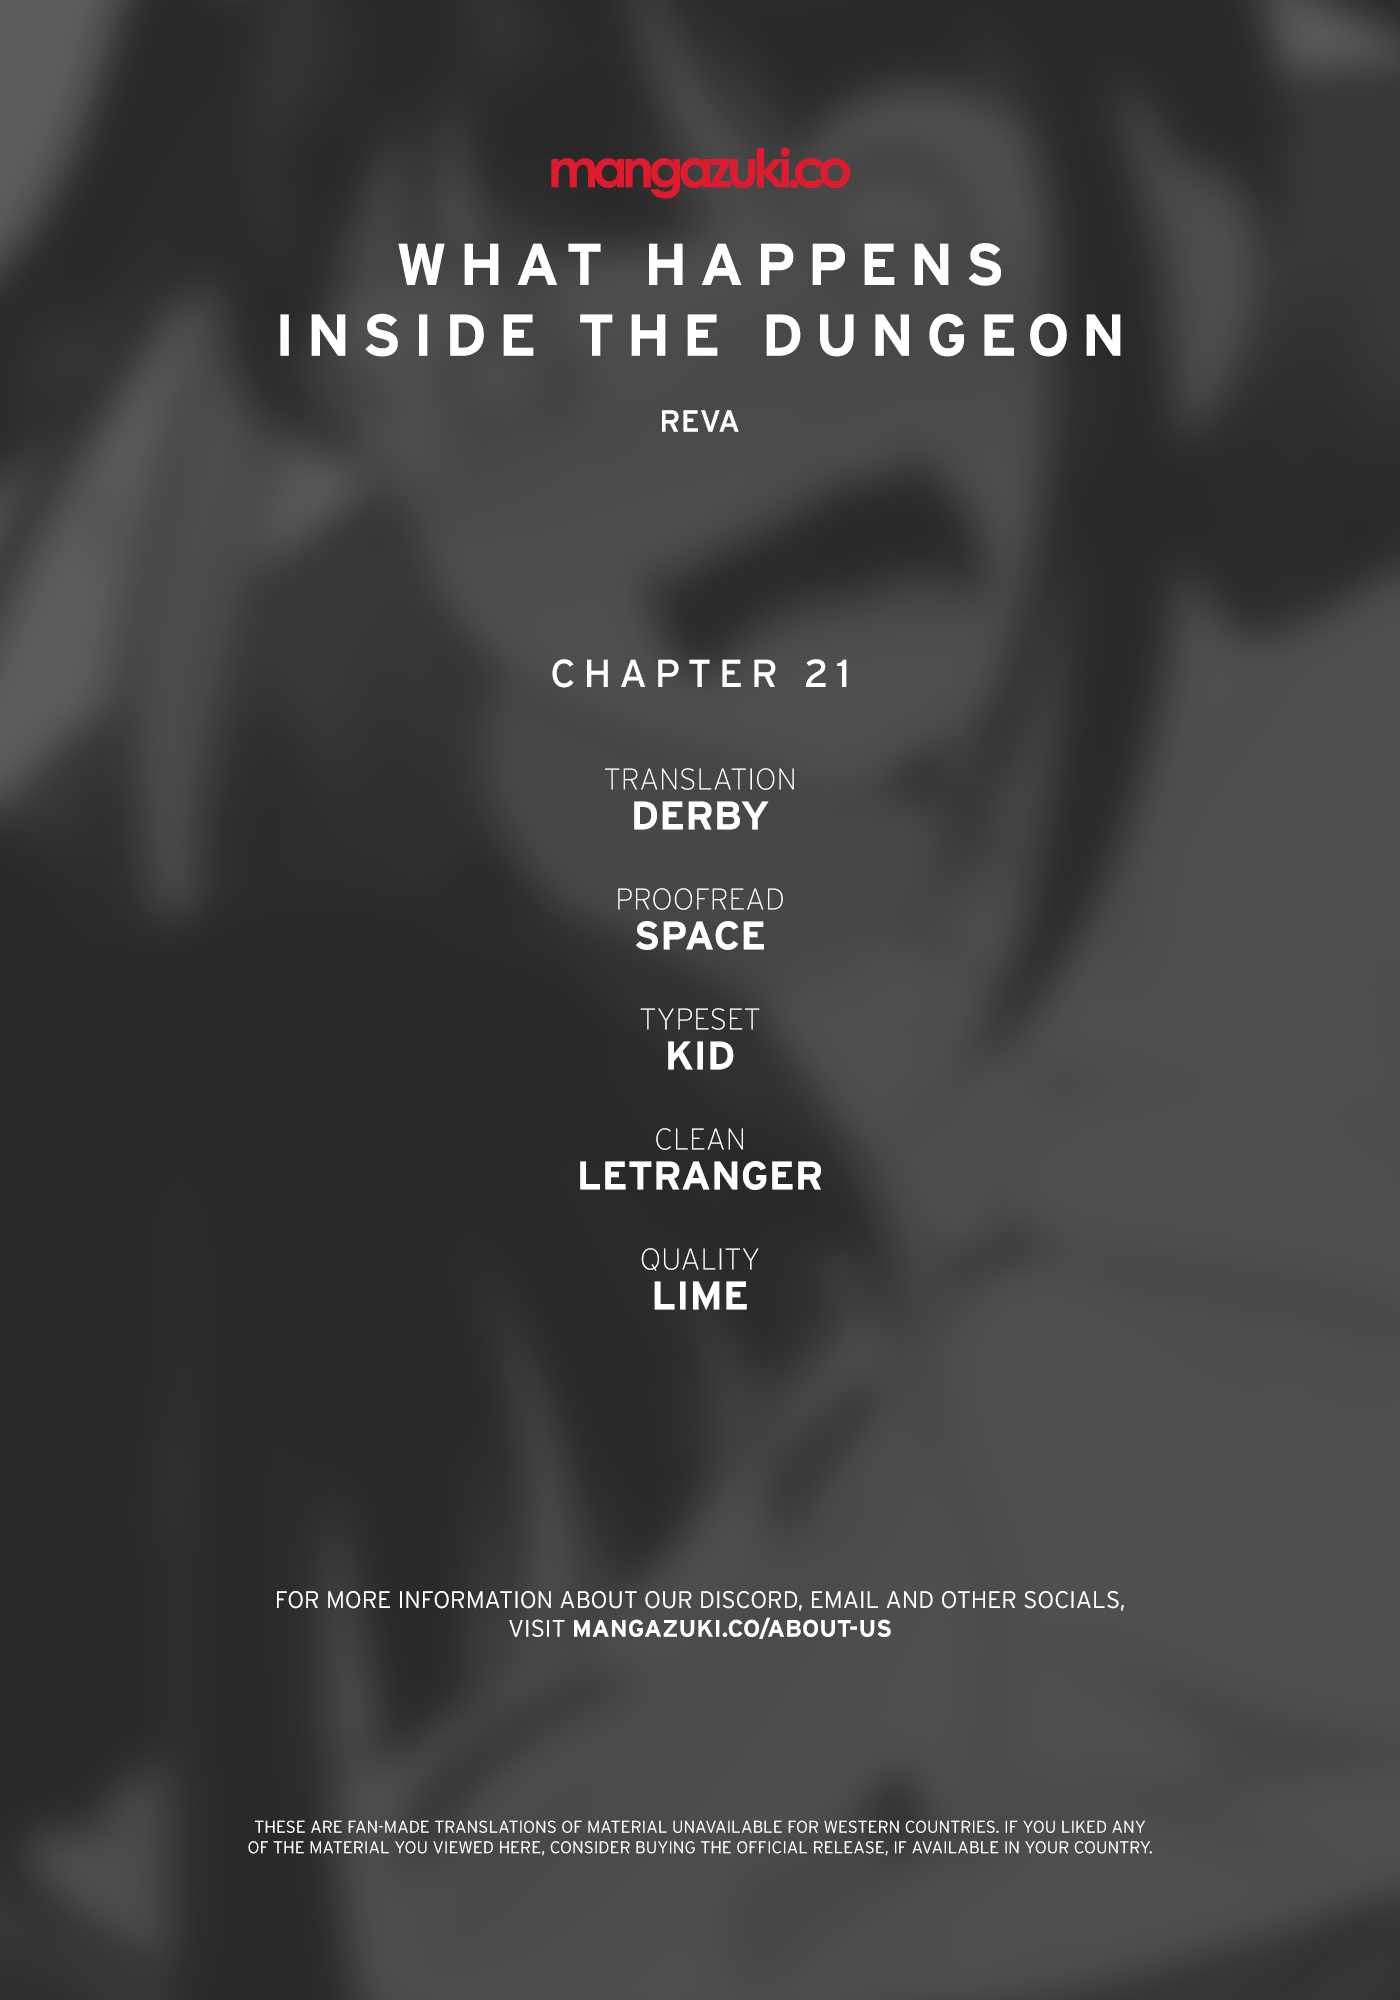 What Happens Inside the Dungeon - Chapter 33679 - Image 1